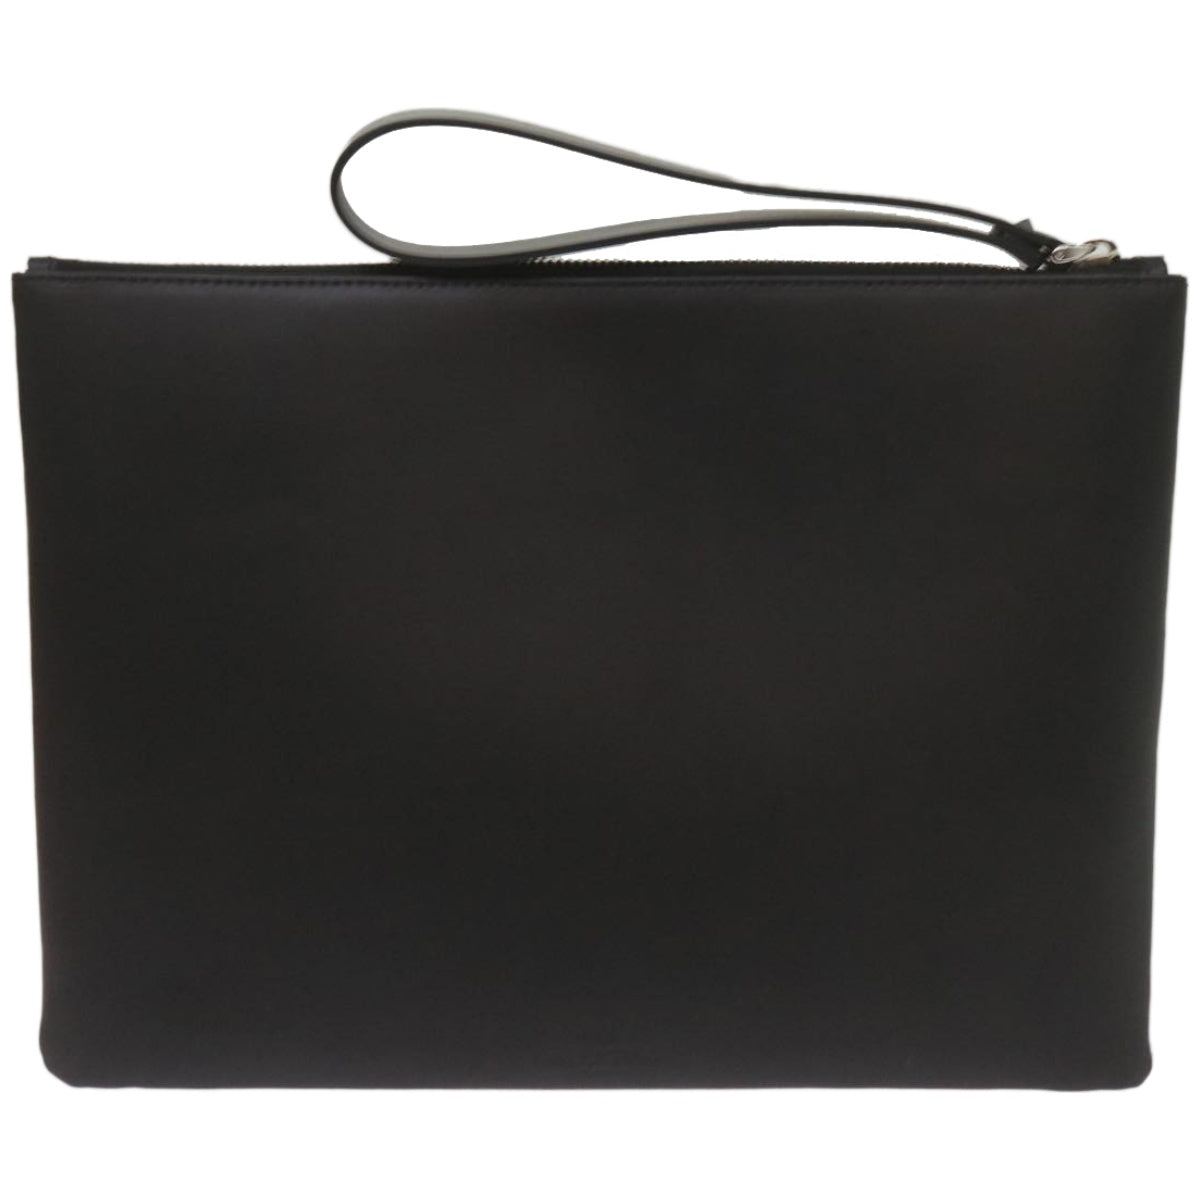 VALENTINO Clutch Bag Leather Black XY2P0299LVN Auth 67606A - 0